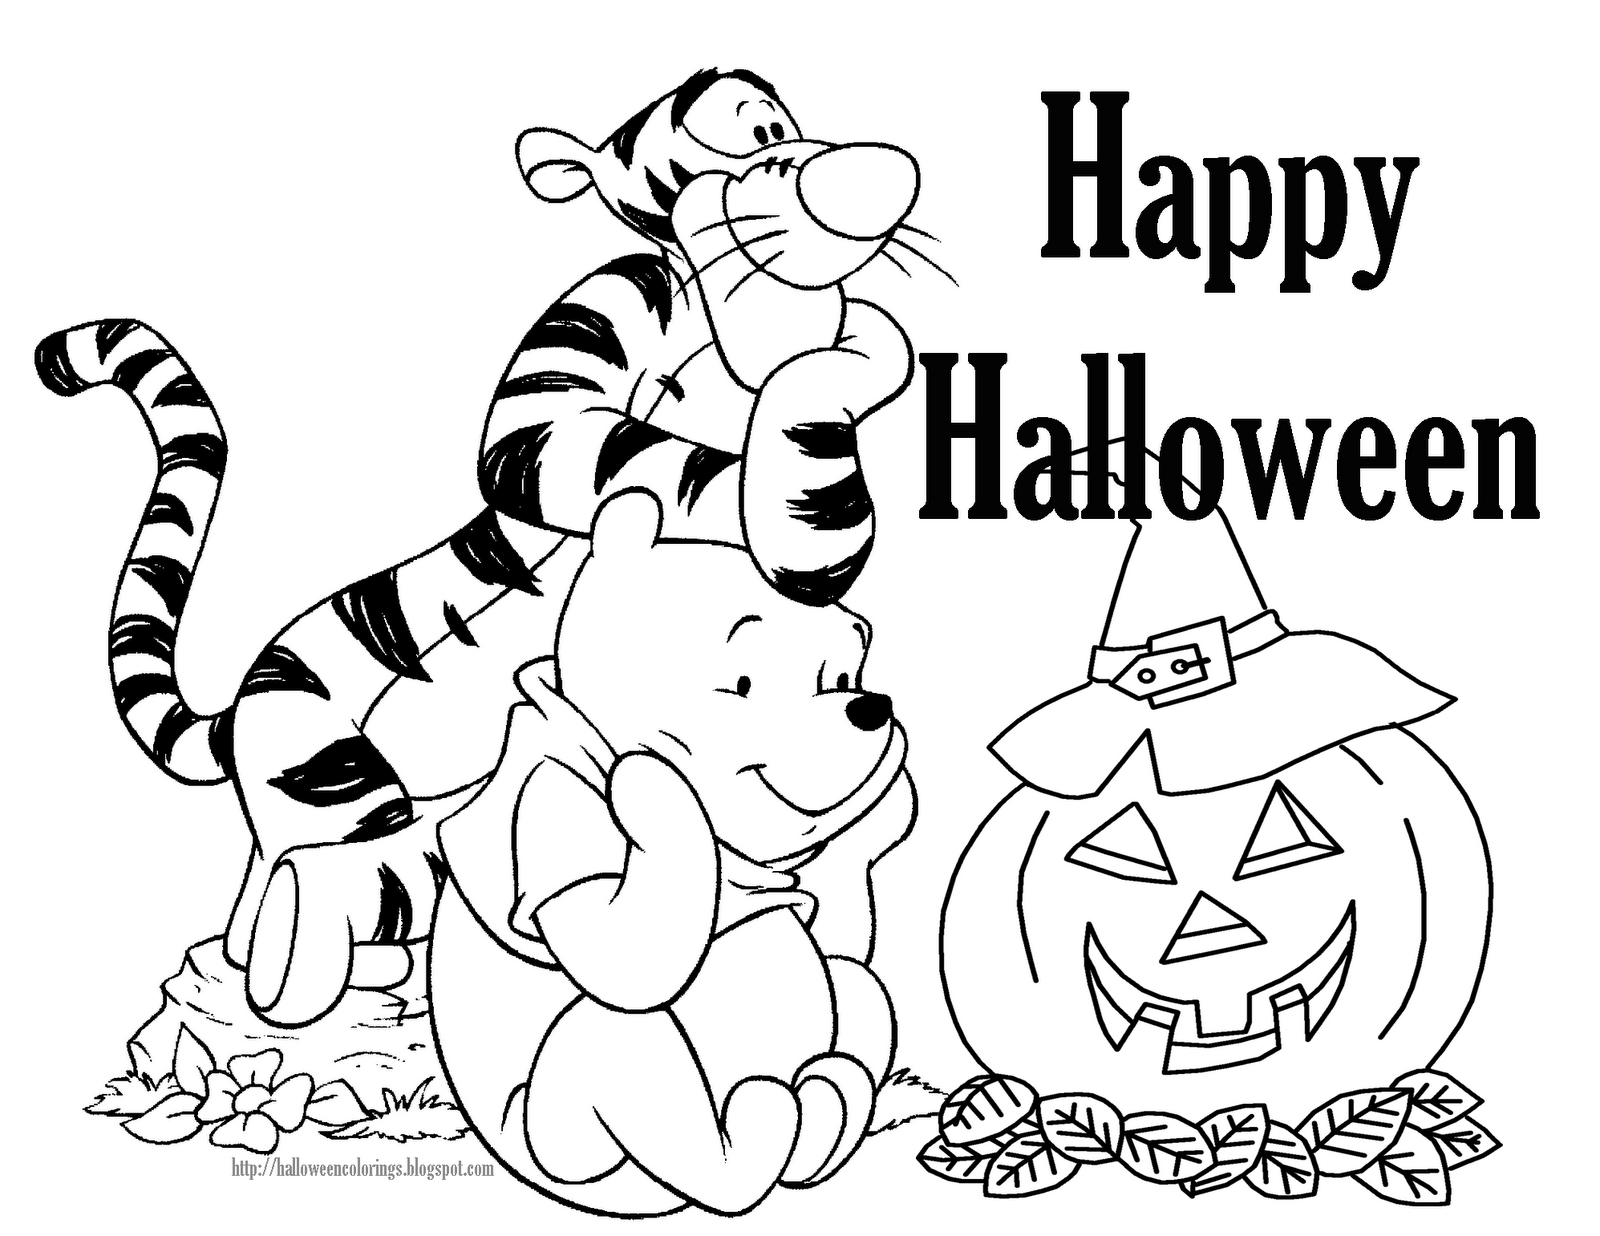  Halloween coloring pages | Winnie the poo